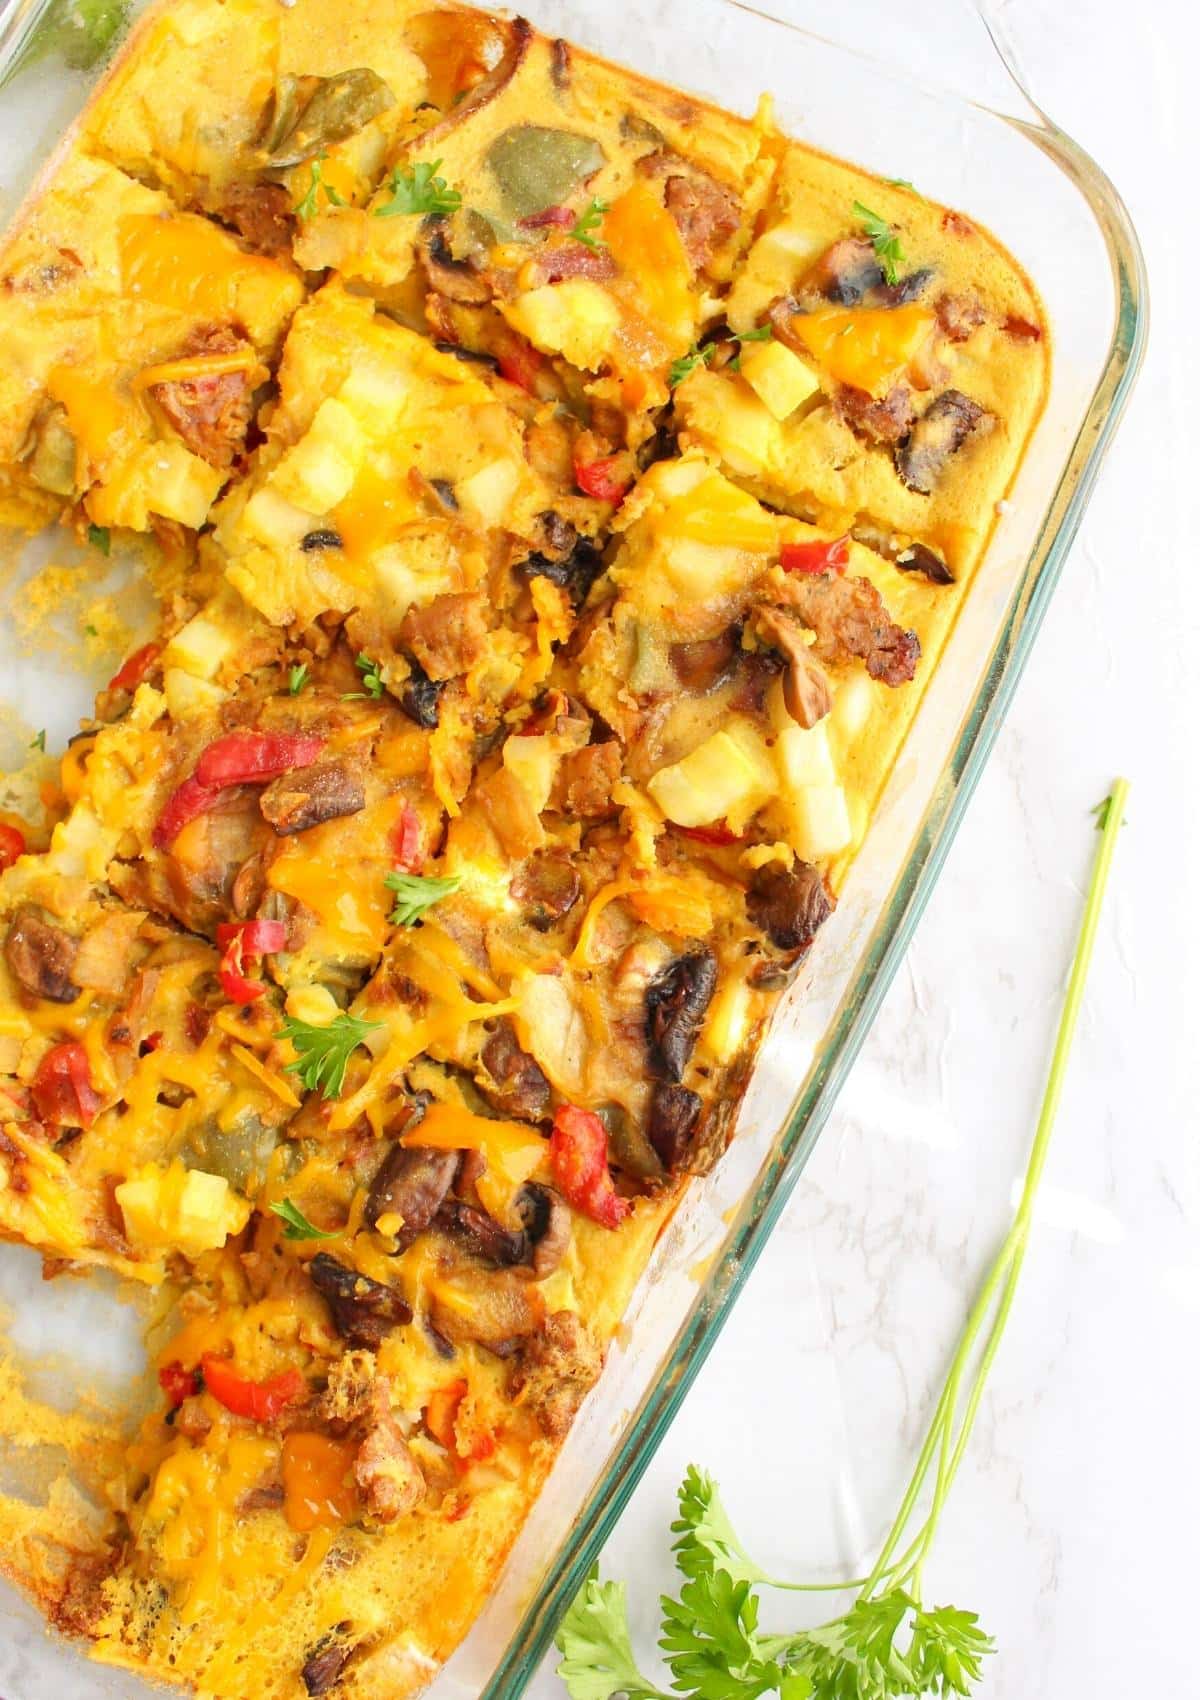 Vegan breakfast casserole in a baking dish, cut up into pieces